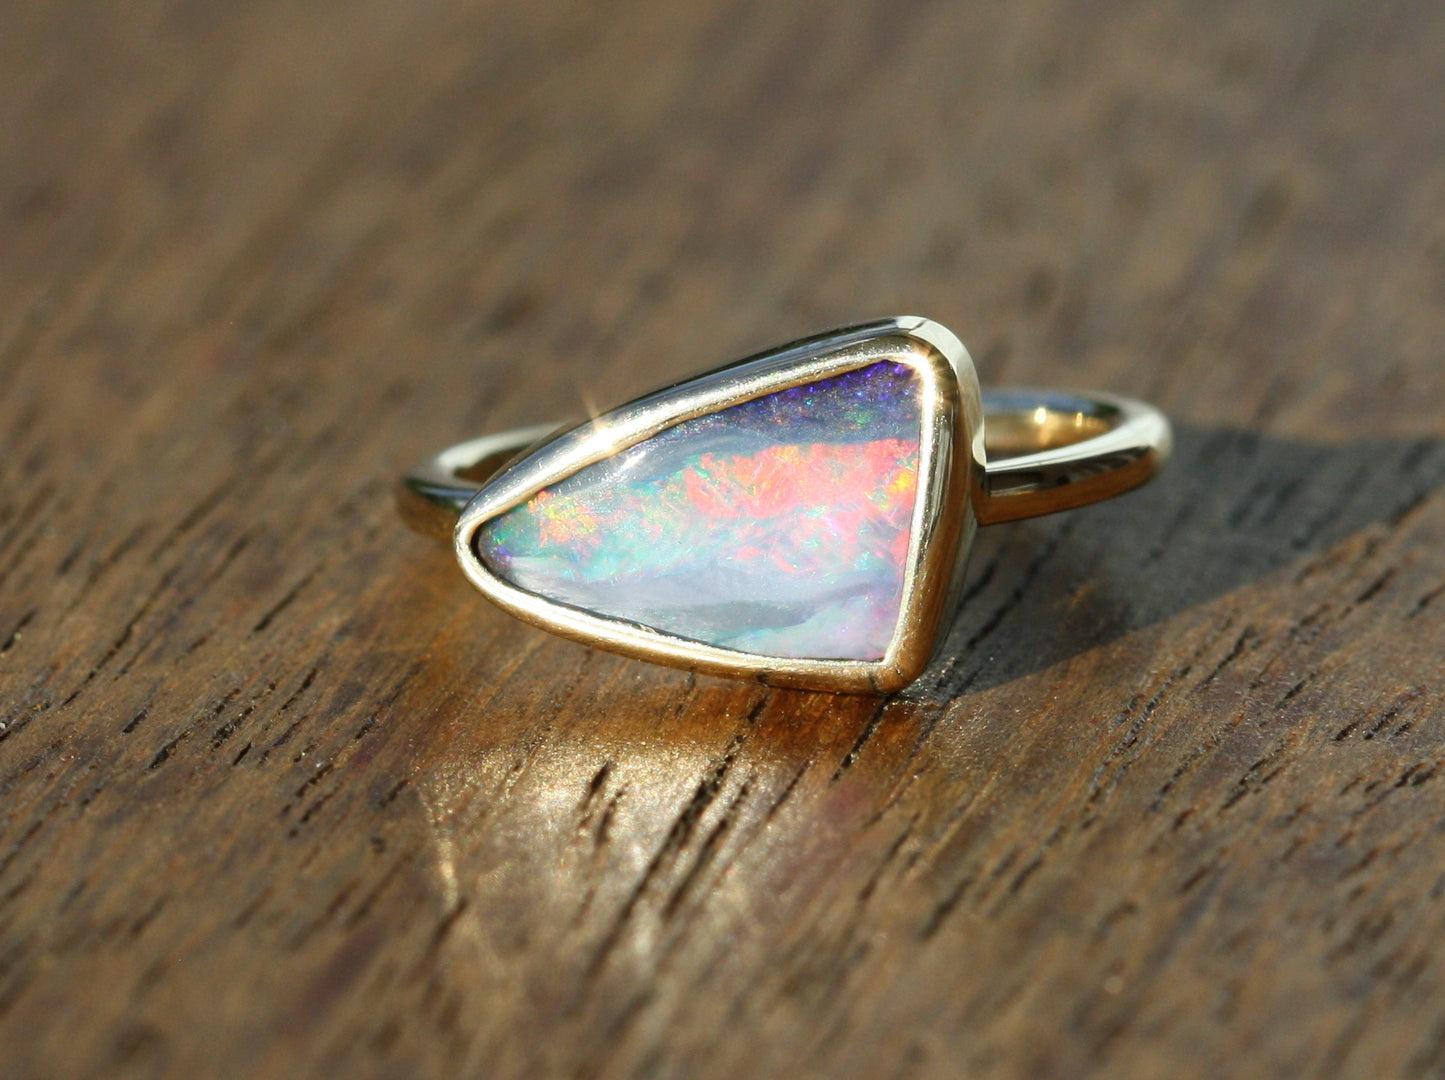 Gold Queensland Boulder Opal Ring. 14ct Yellow Gold polished band. Australian Made in Brisbane Studio with Ethically sourced materials. Purple Opal.